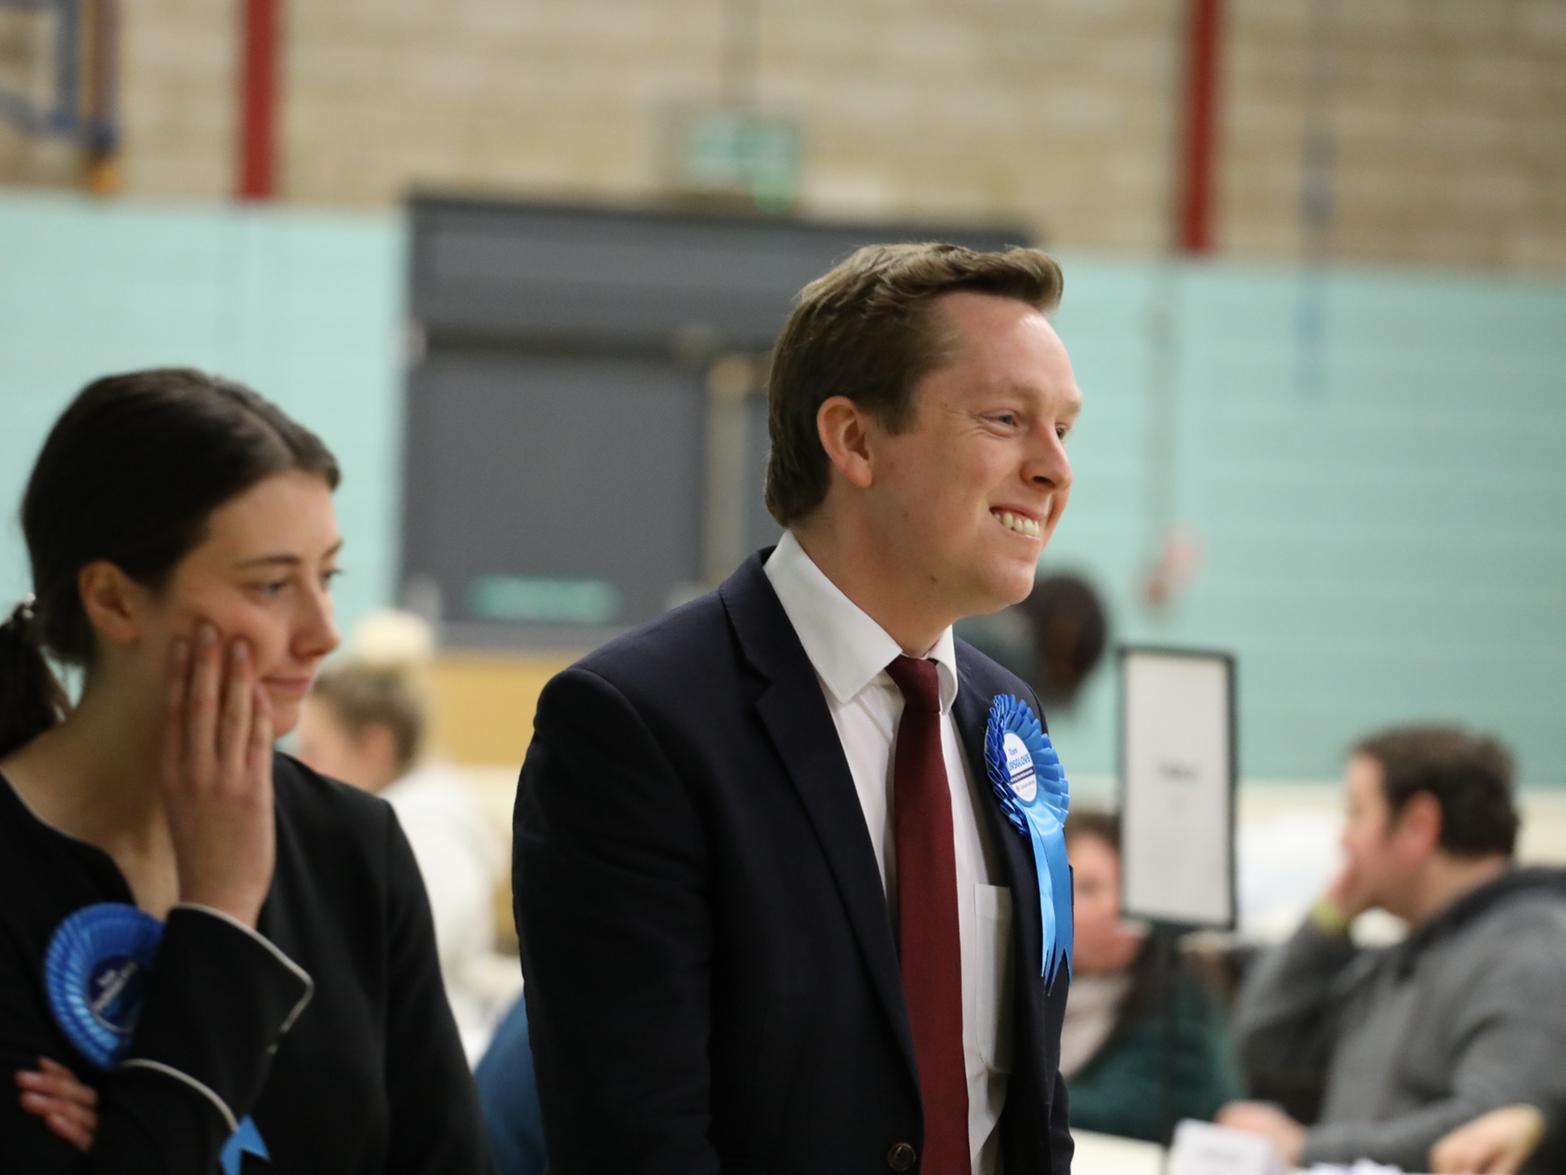 Tom Pursglove arrives at the count with East Northants MP Harriet Pentland